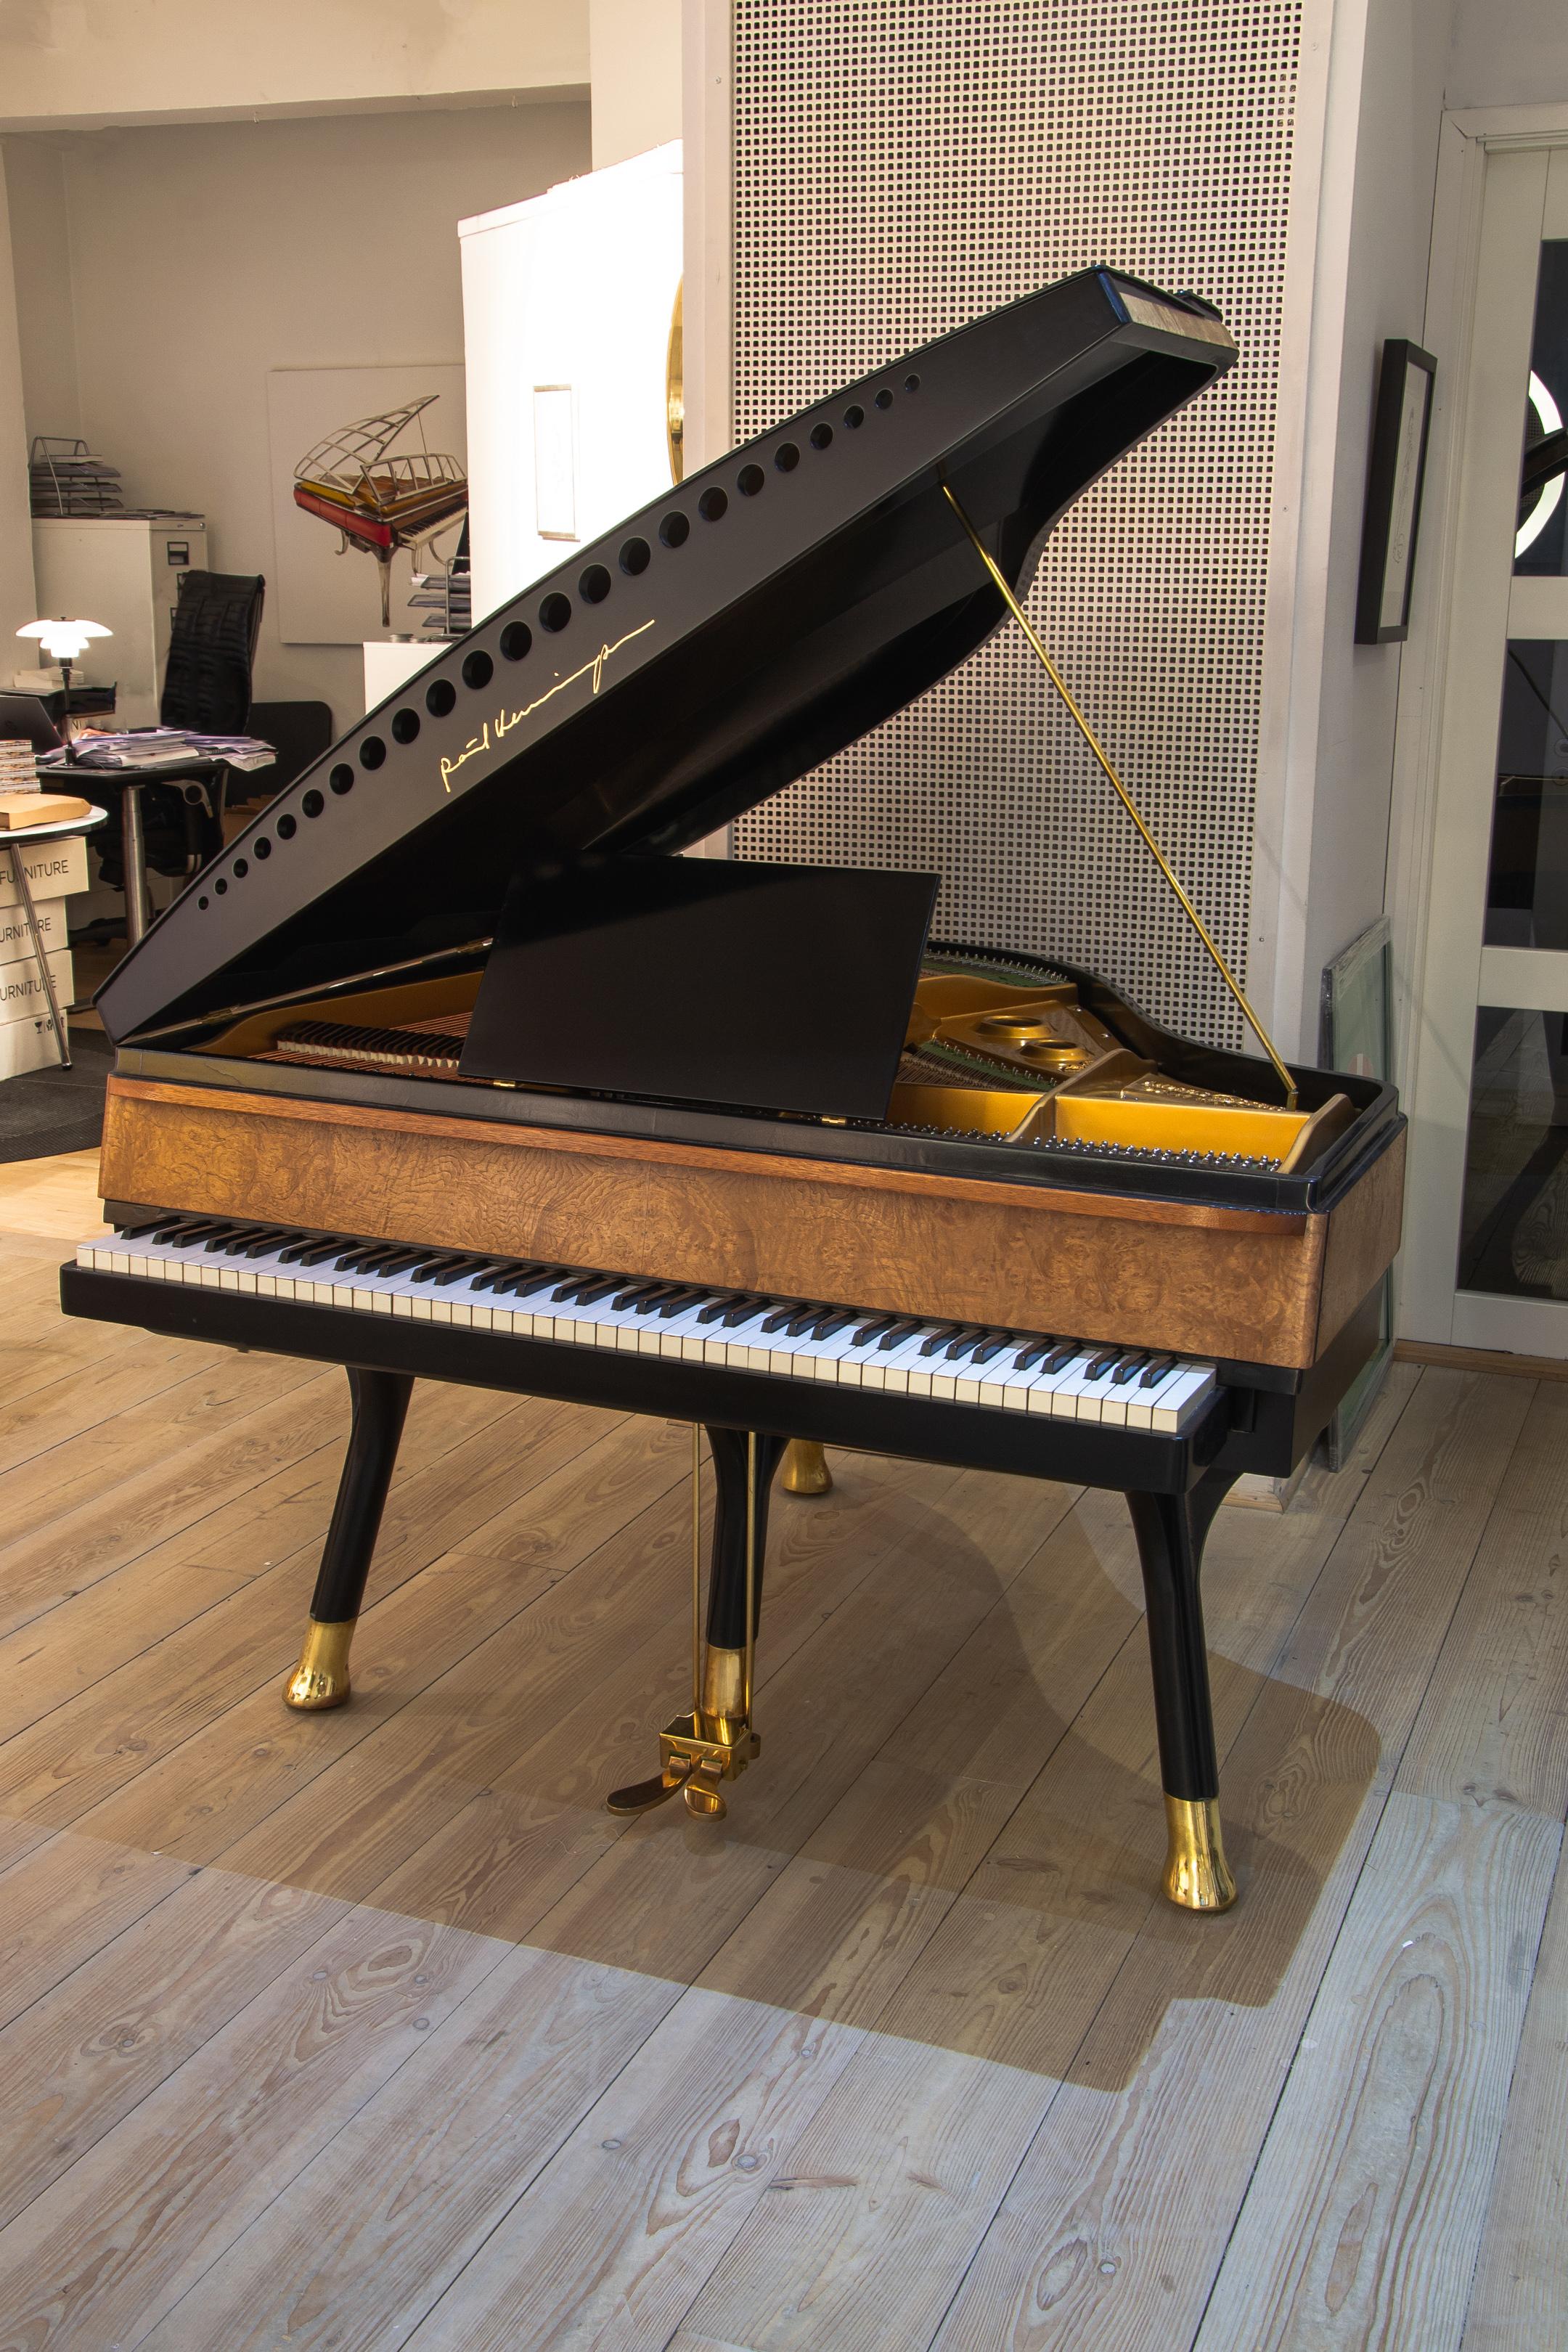 - All prices are listed ex works.
- 5 year guarantee.
- We regularly crate, ship and install PH Pianos worldwide with full insurance.

This beautiful PH Bow Grand Piano is made with a new cabinet in a very elegant chestnut veneer and with a